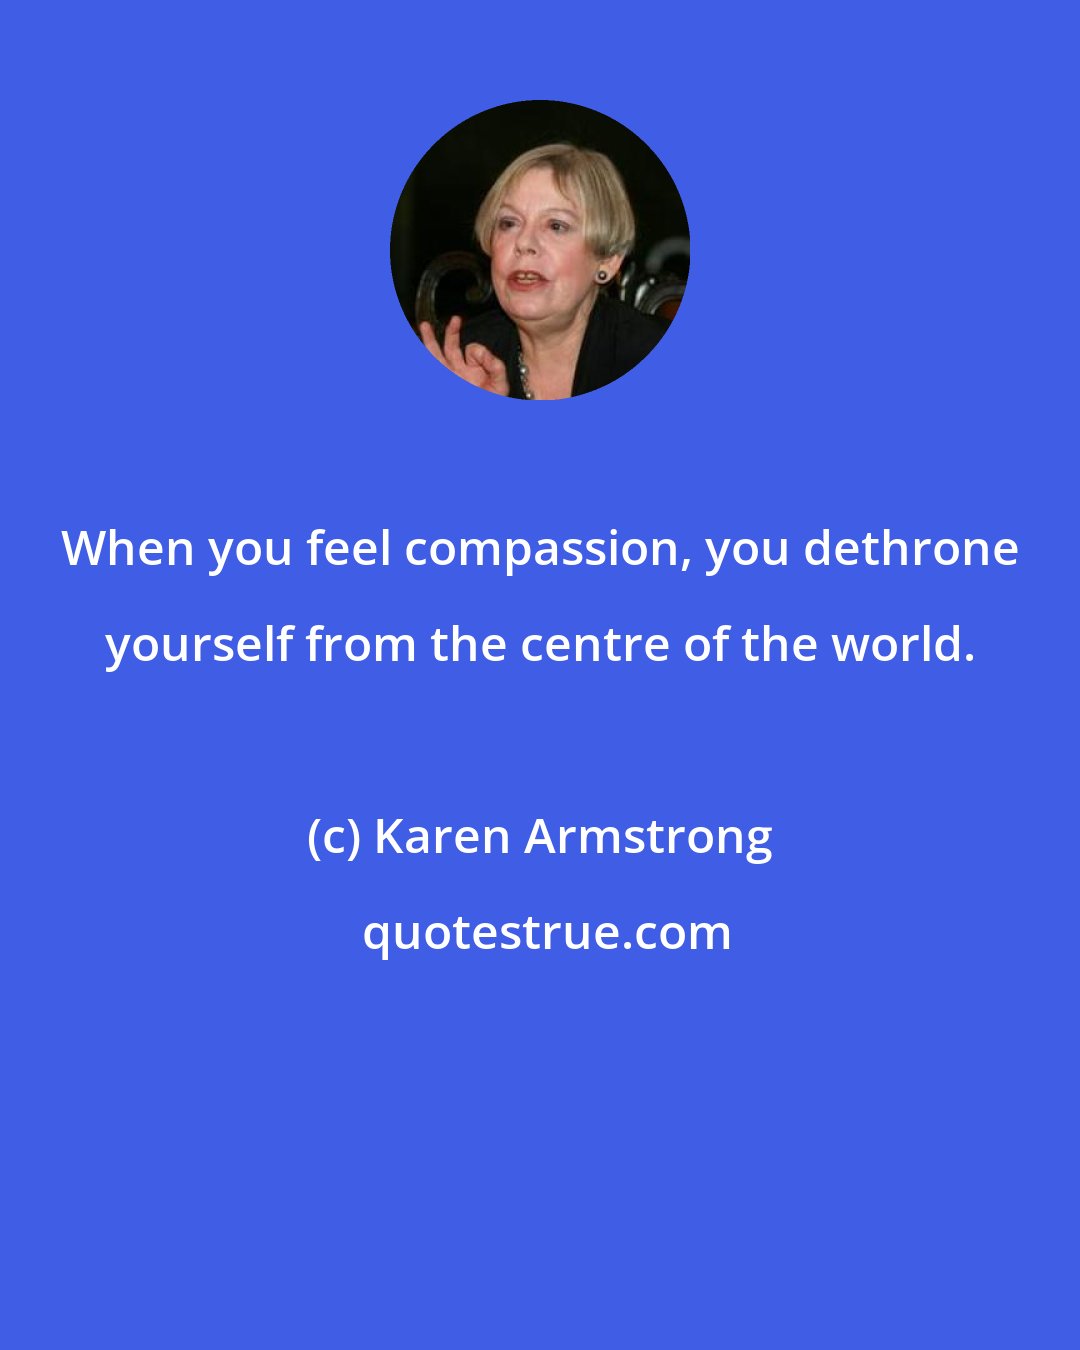 Karen Armstrong: When you feel compassion, you dethrone yourself from the centre of the world.